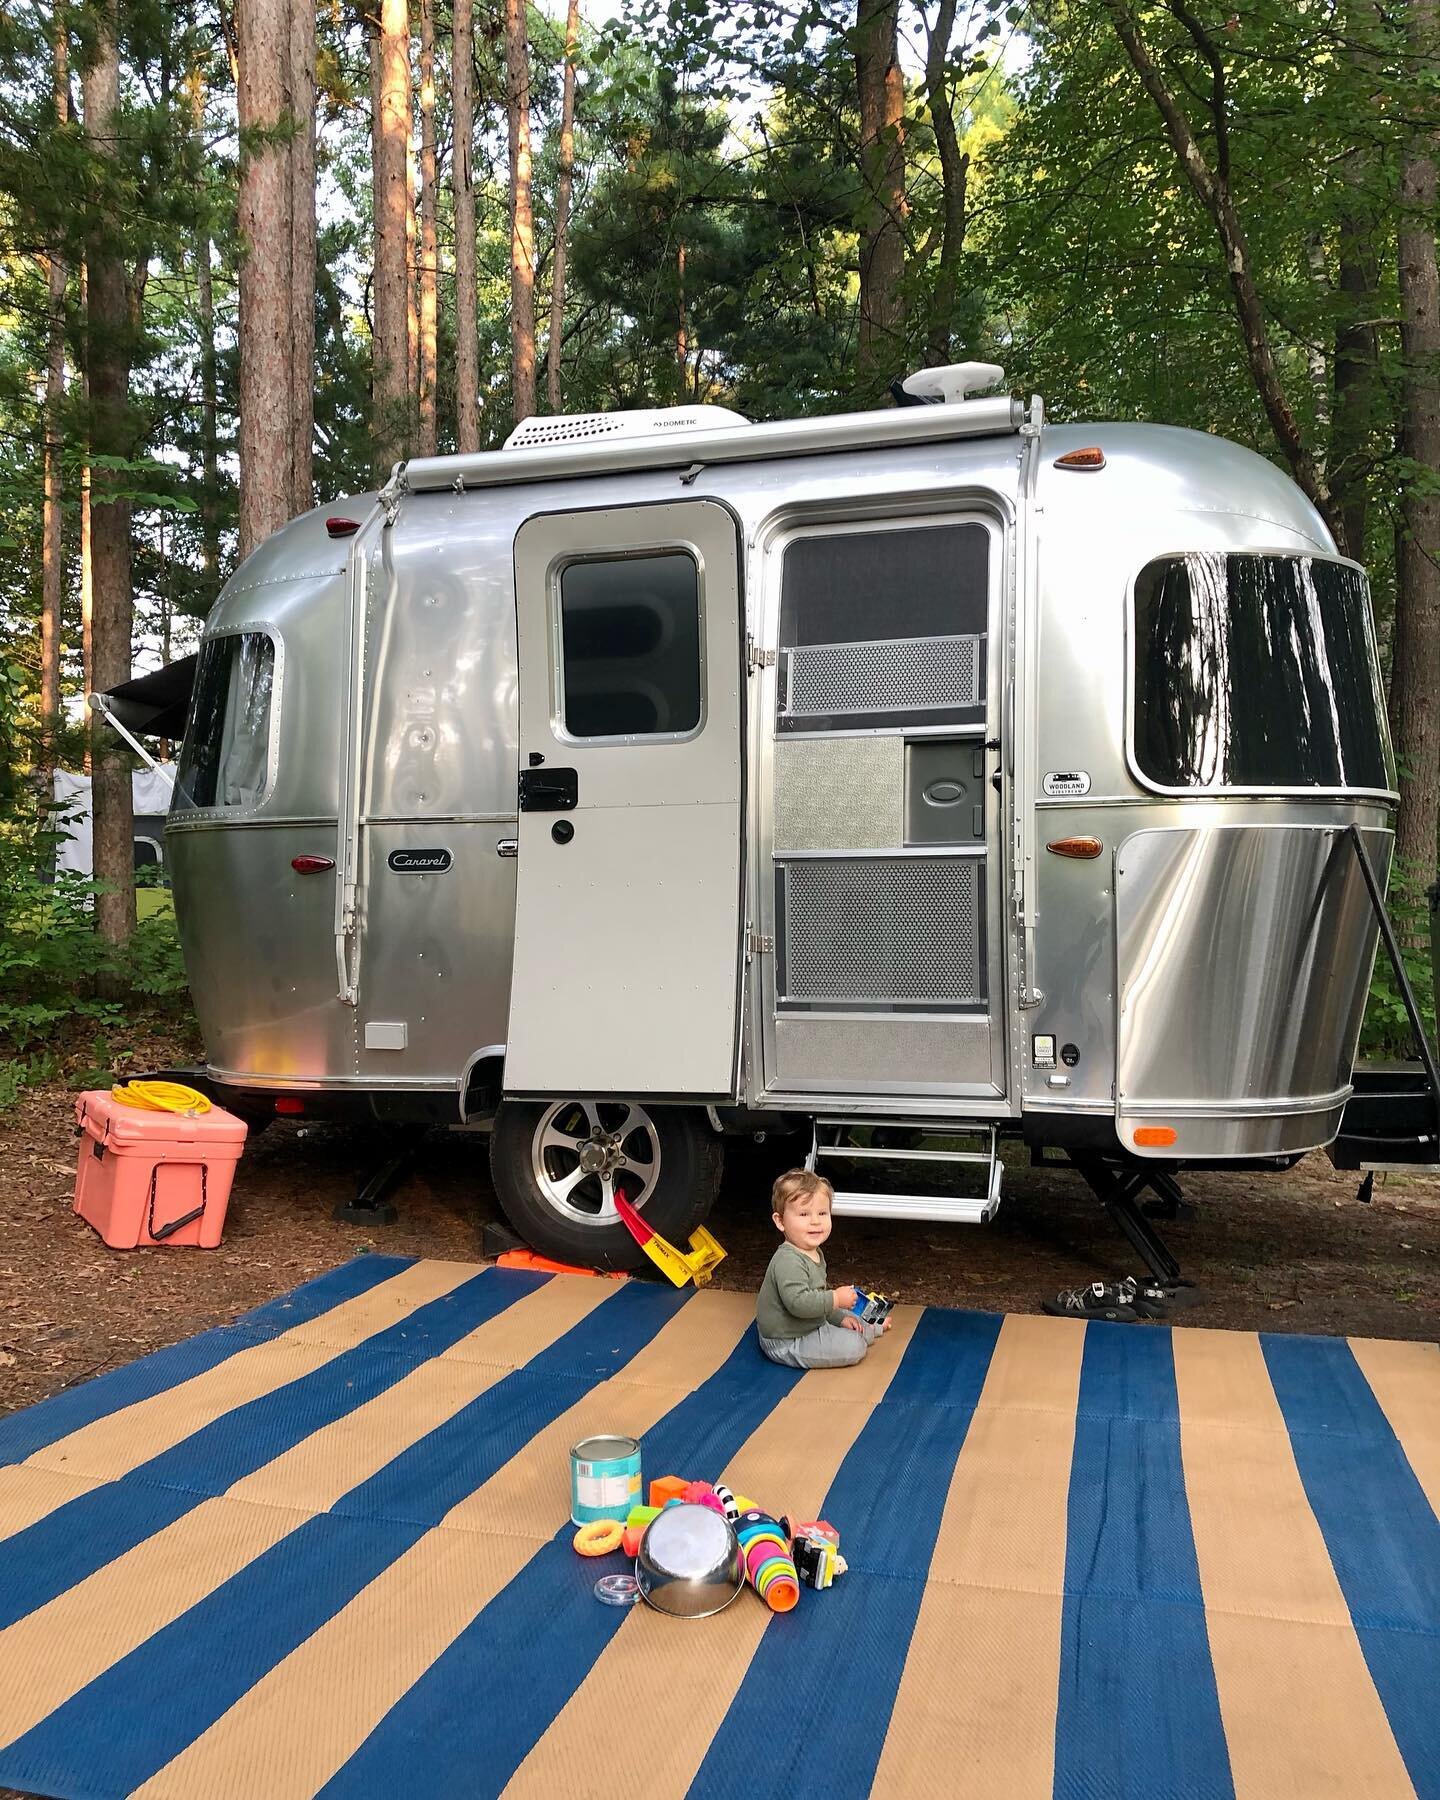 We&rsquo;ve loved exploring northern Michigan! During this trip we&rsquo;ve camped at Interlochen, Leelanau, and Traverse City State Park. Loren&rsquo;s favorite activities have been swinging, swimming in beautiful Lake Michigan, and crawling around 